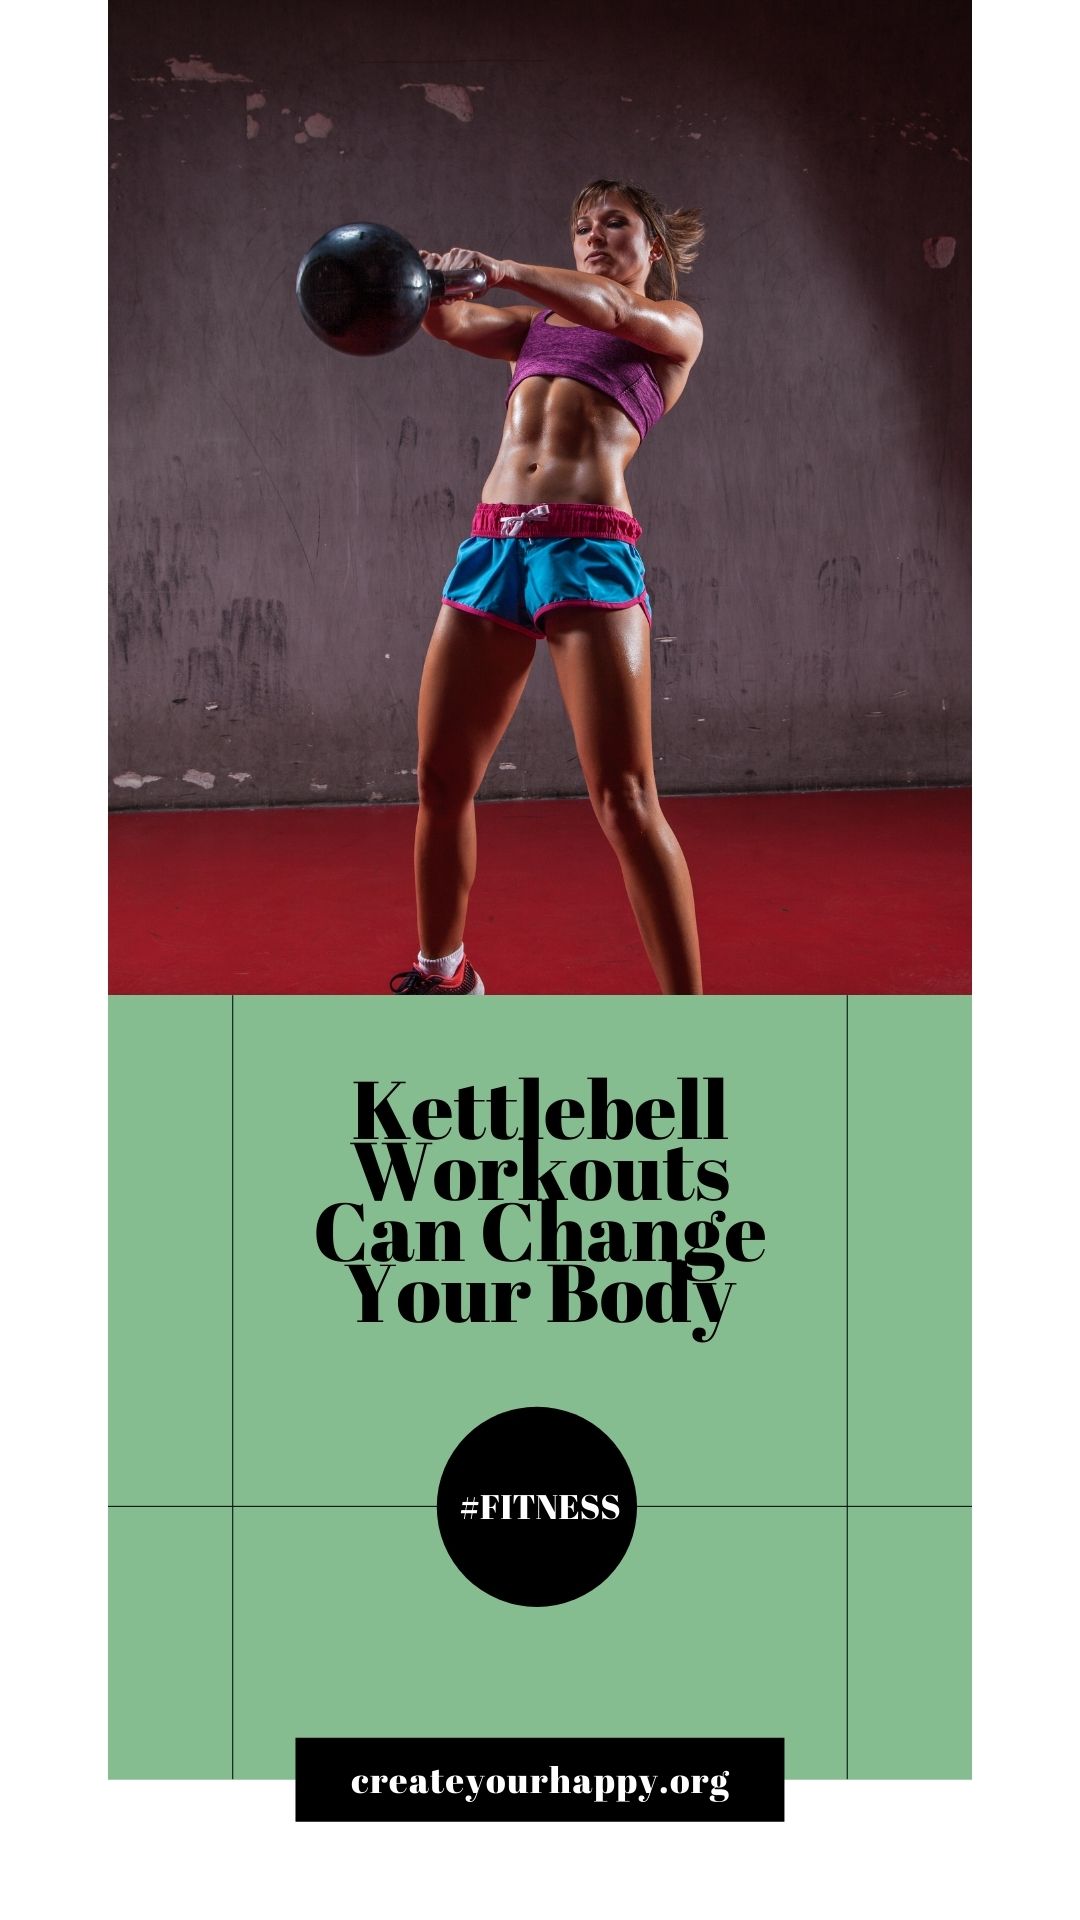 Kettlebell Workouts Can Change Your Body